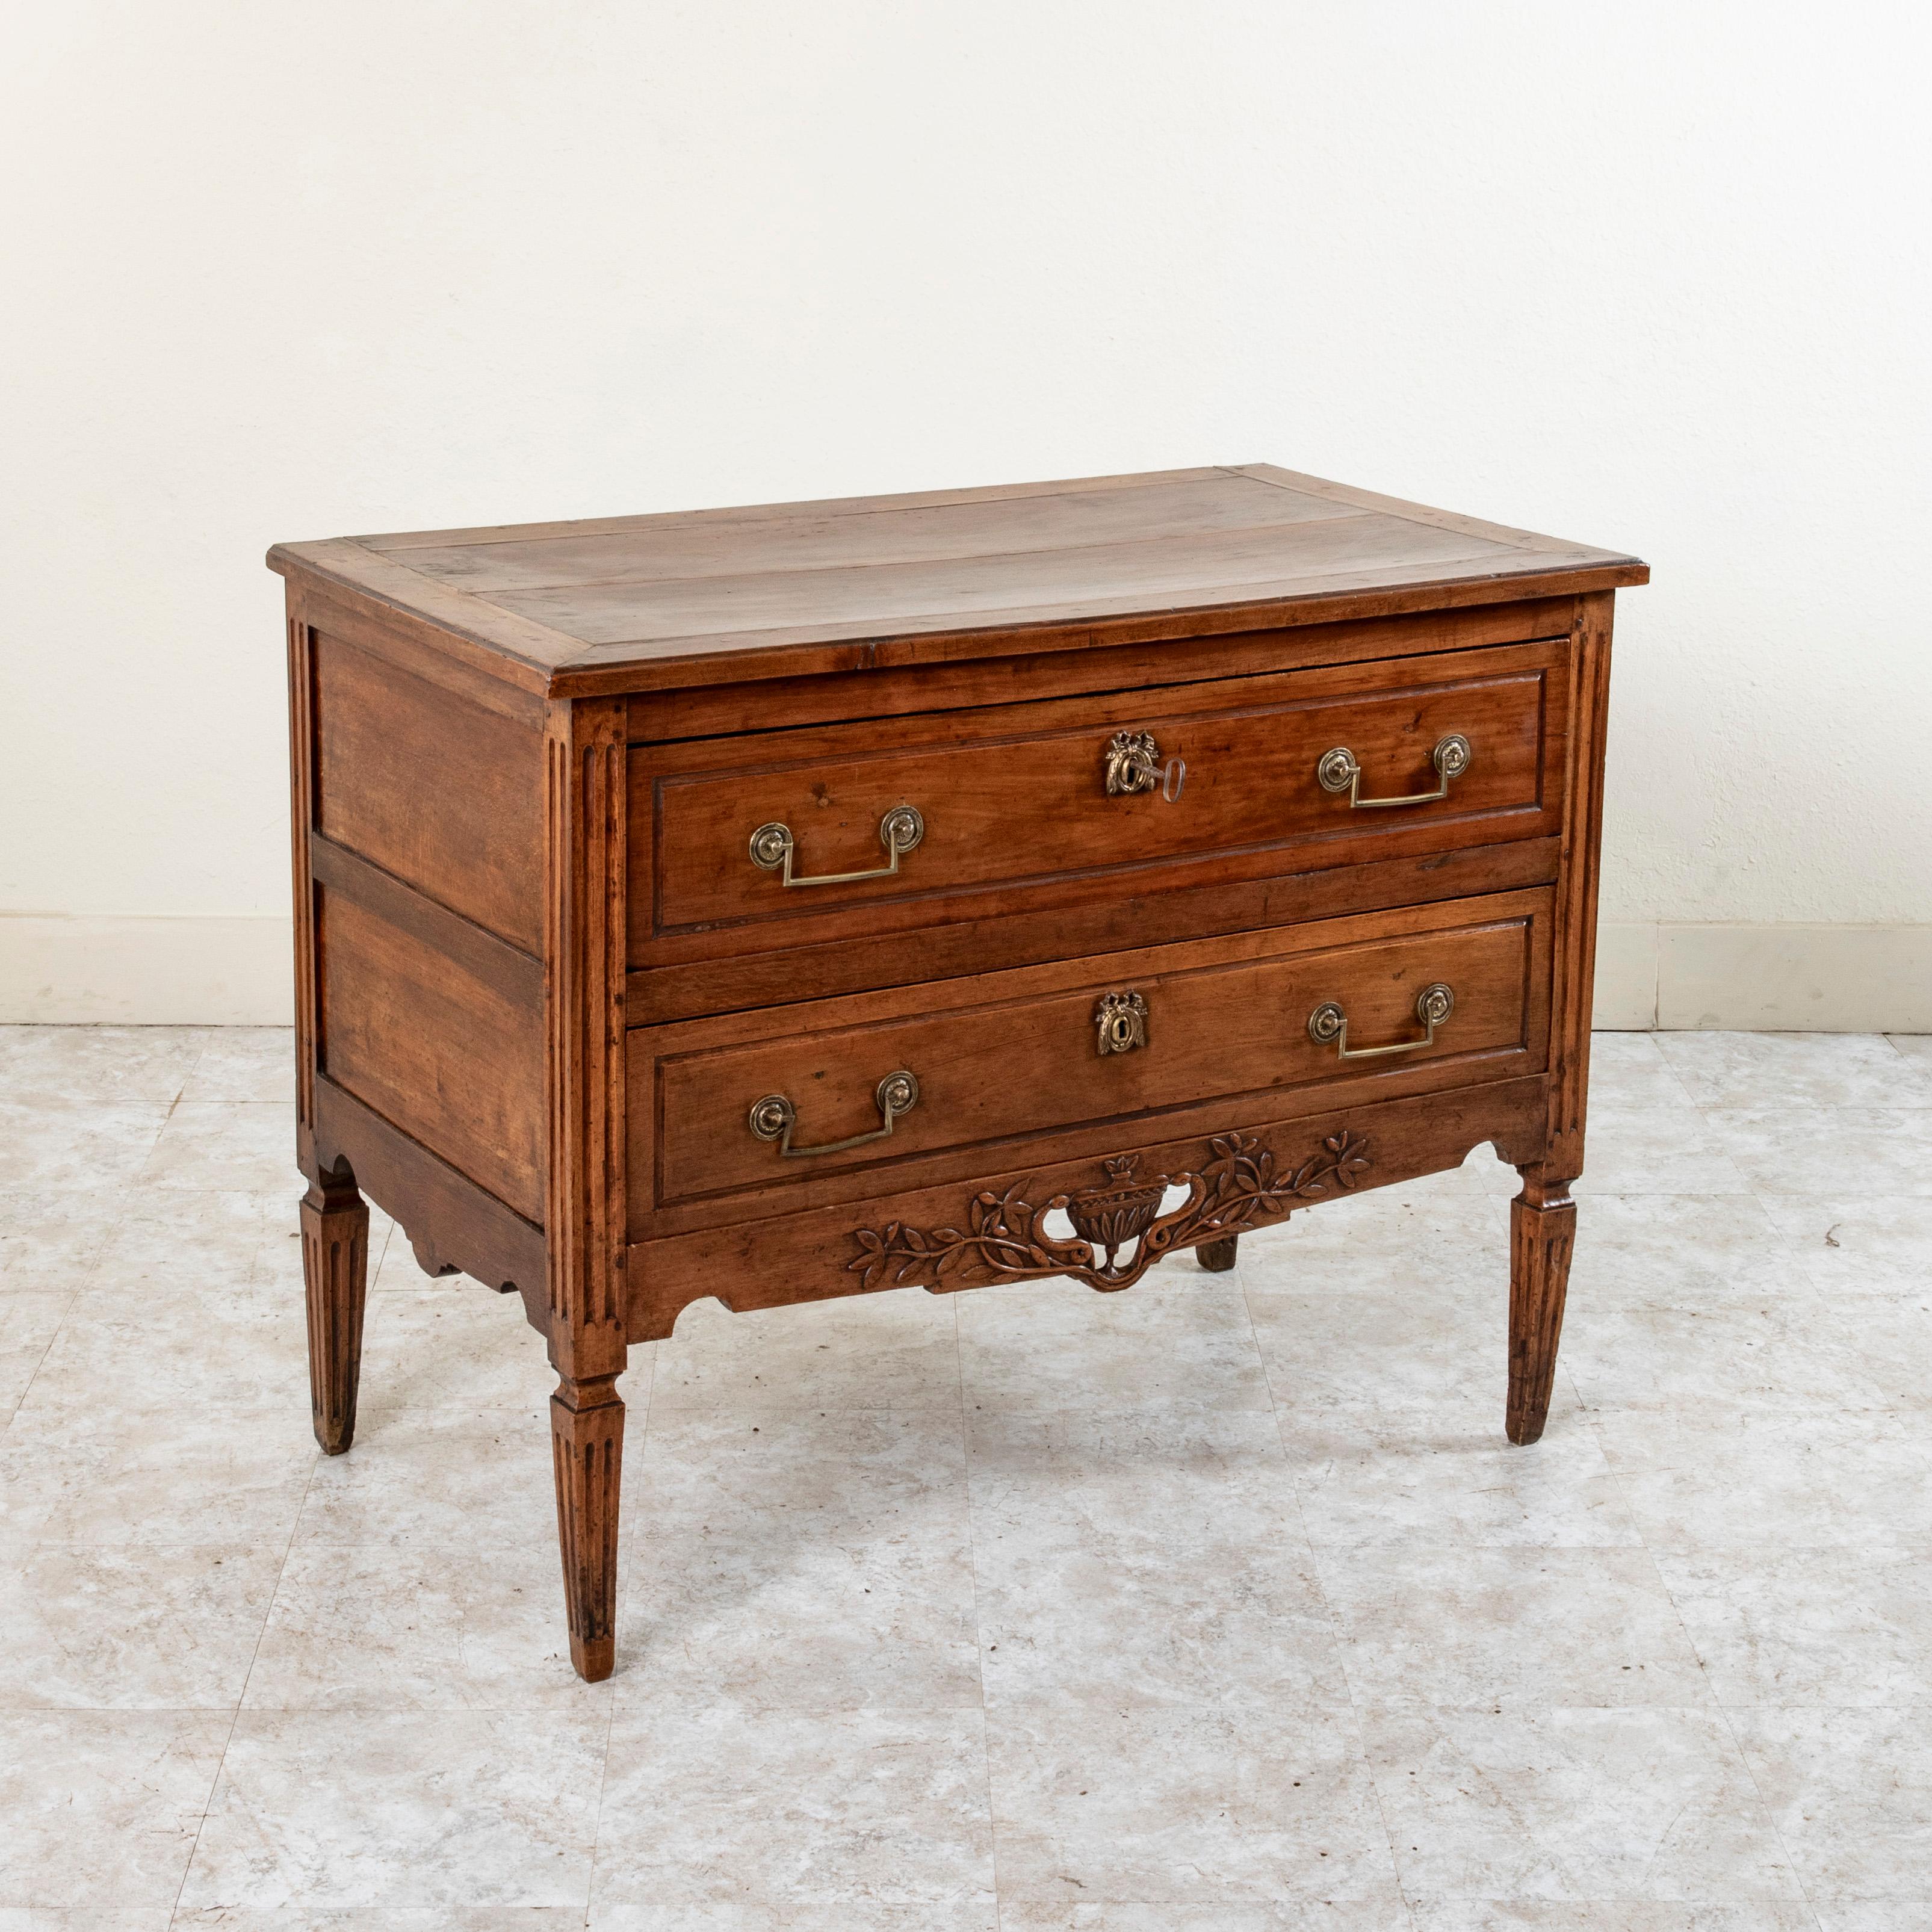 Hand-Carved Late 18th Century French Louis XVI Period Walnut Commode or Chest of Drawers